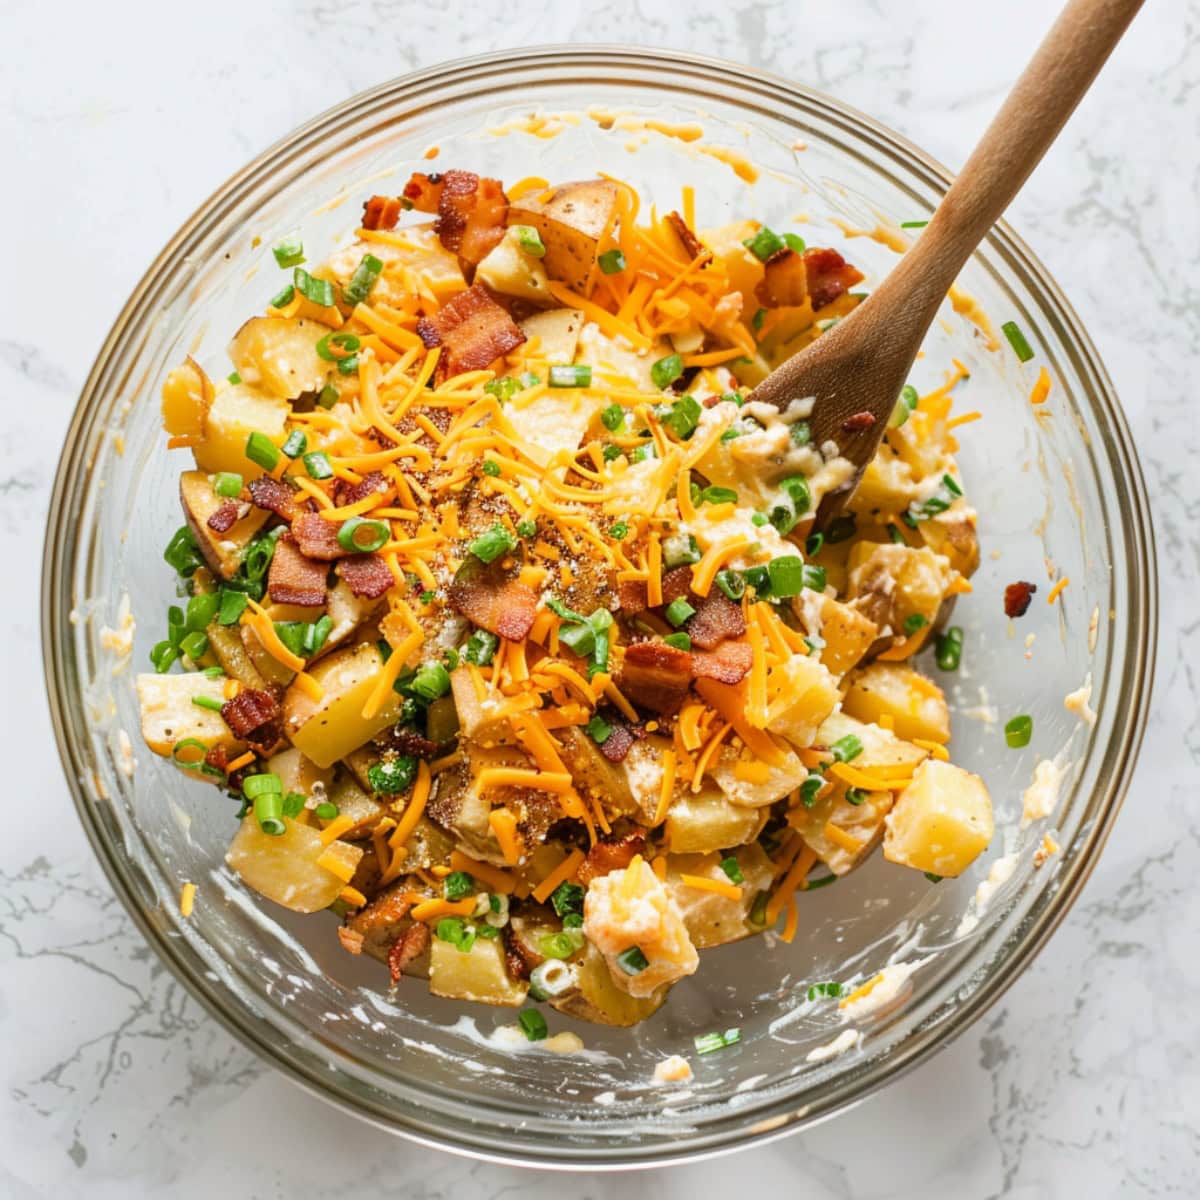 Peeled diced potatoes, grated cheddar cheese, crumbled bacon, sliced green onions, and garlic salt, mayonnaise mixed in a large glass bowl.